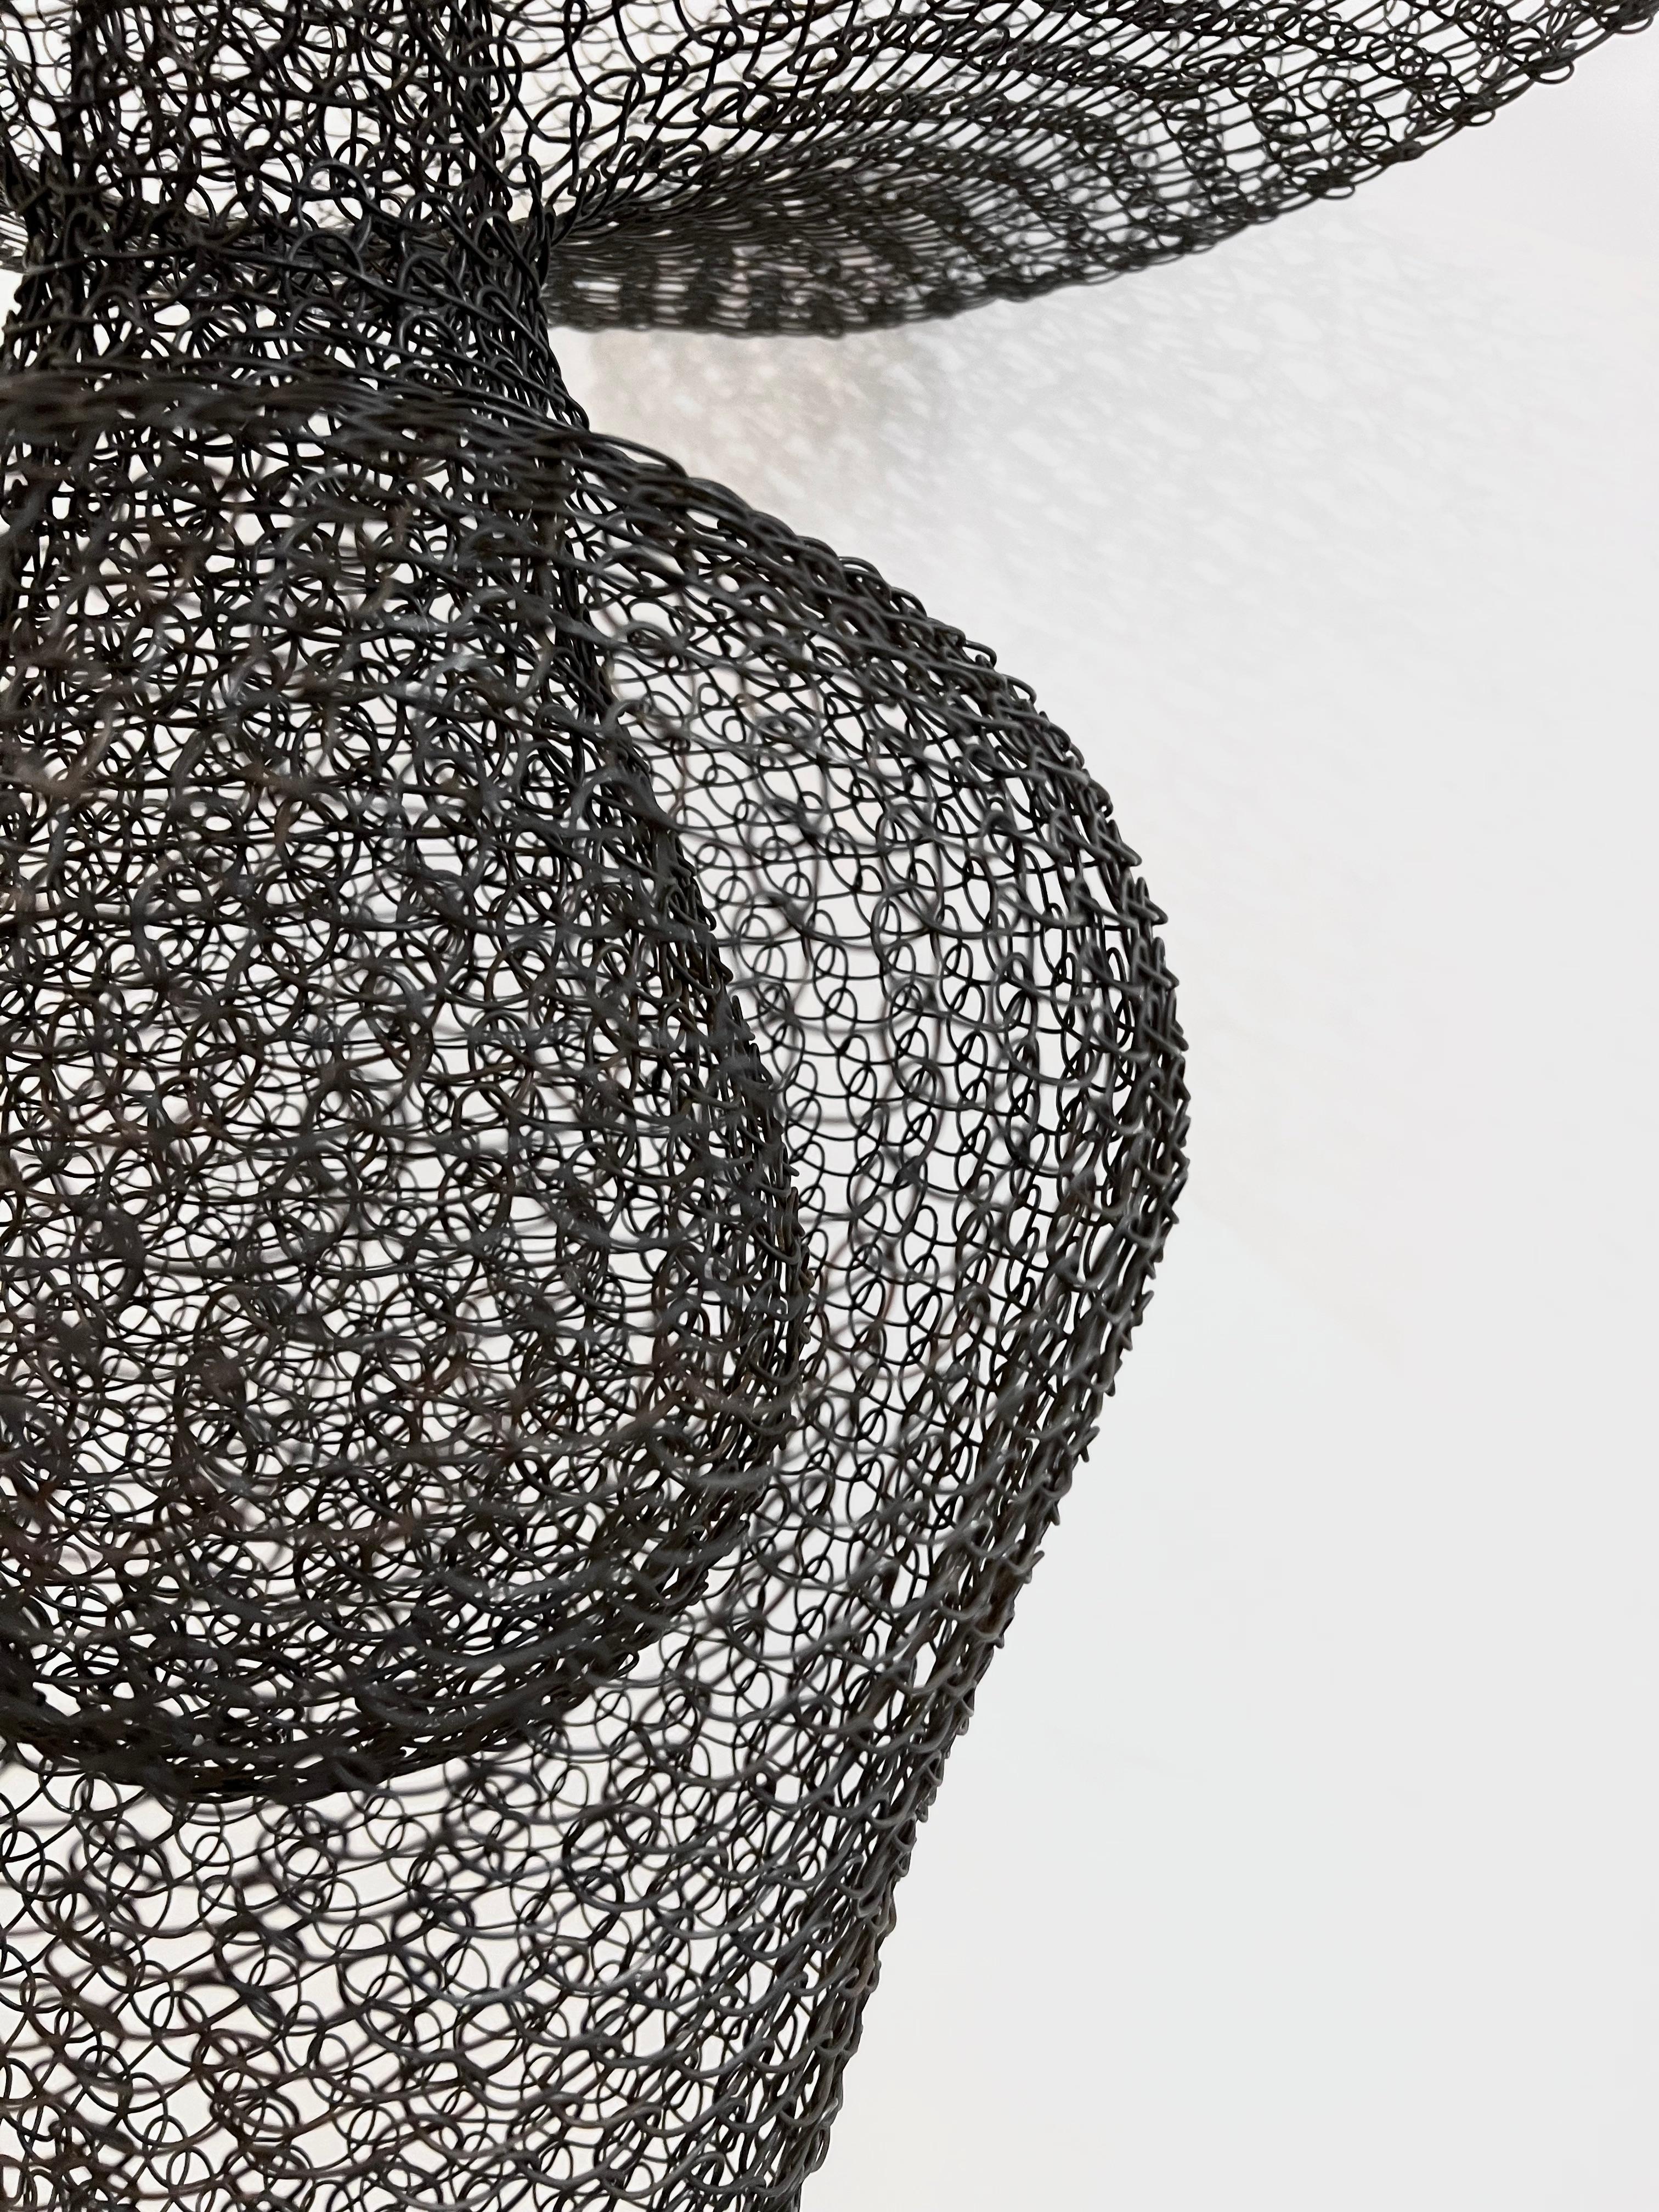 Organic Woven Mesh Wire Sculpture by Ulrikk Dufosse For Sale 5